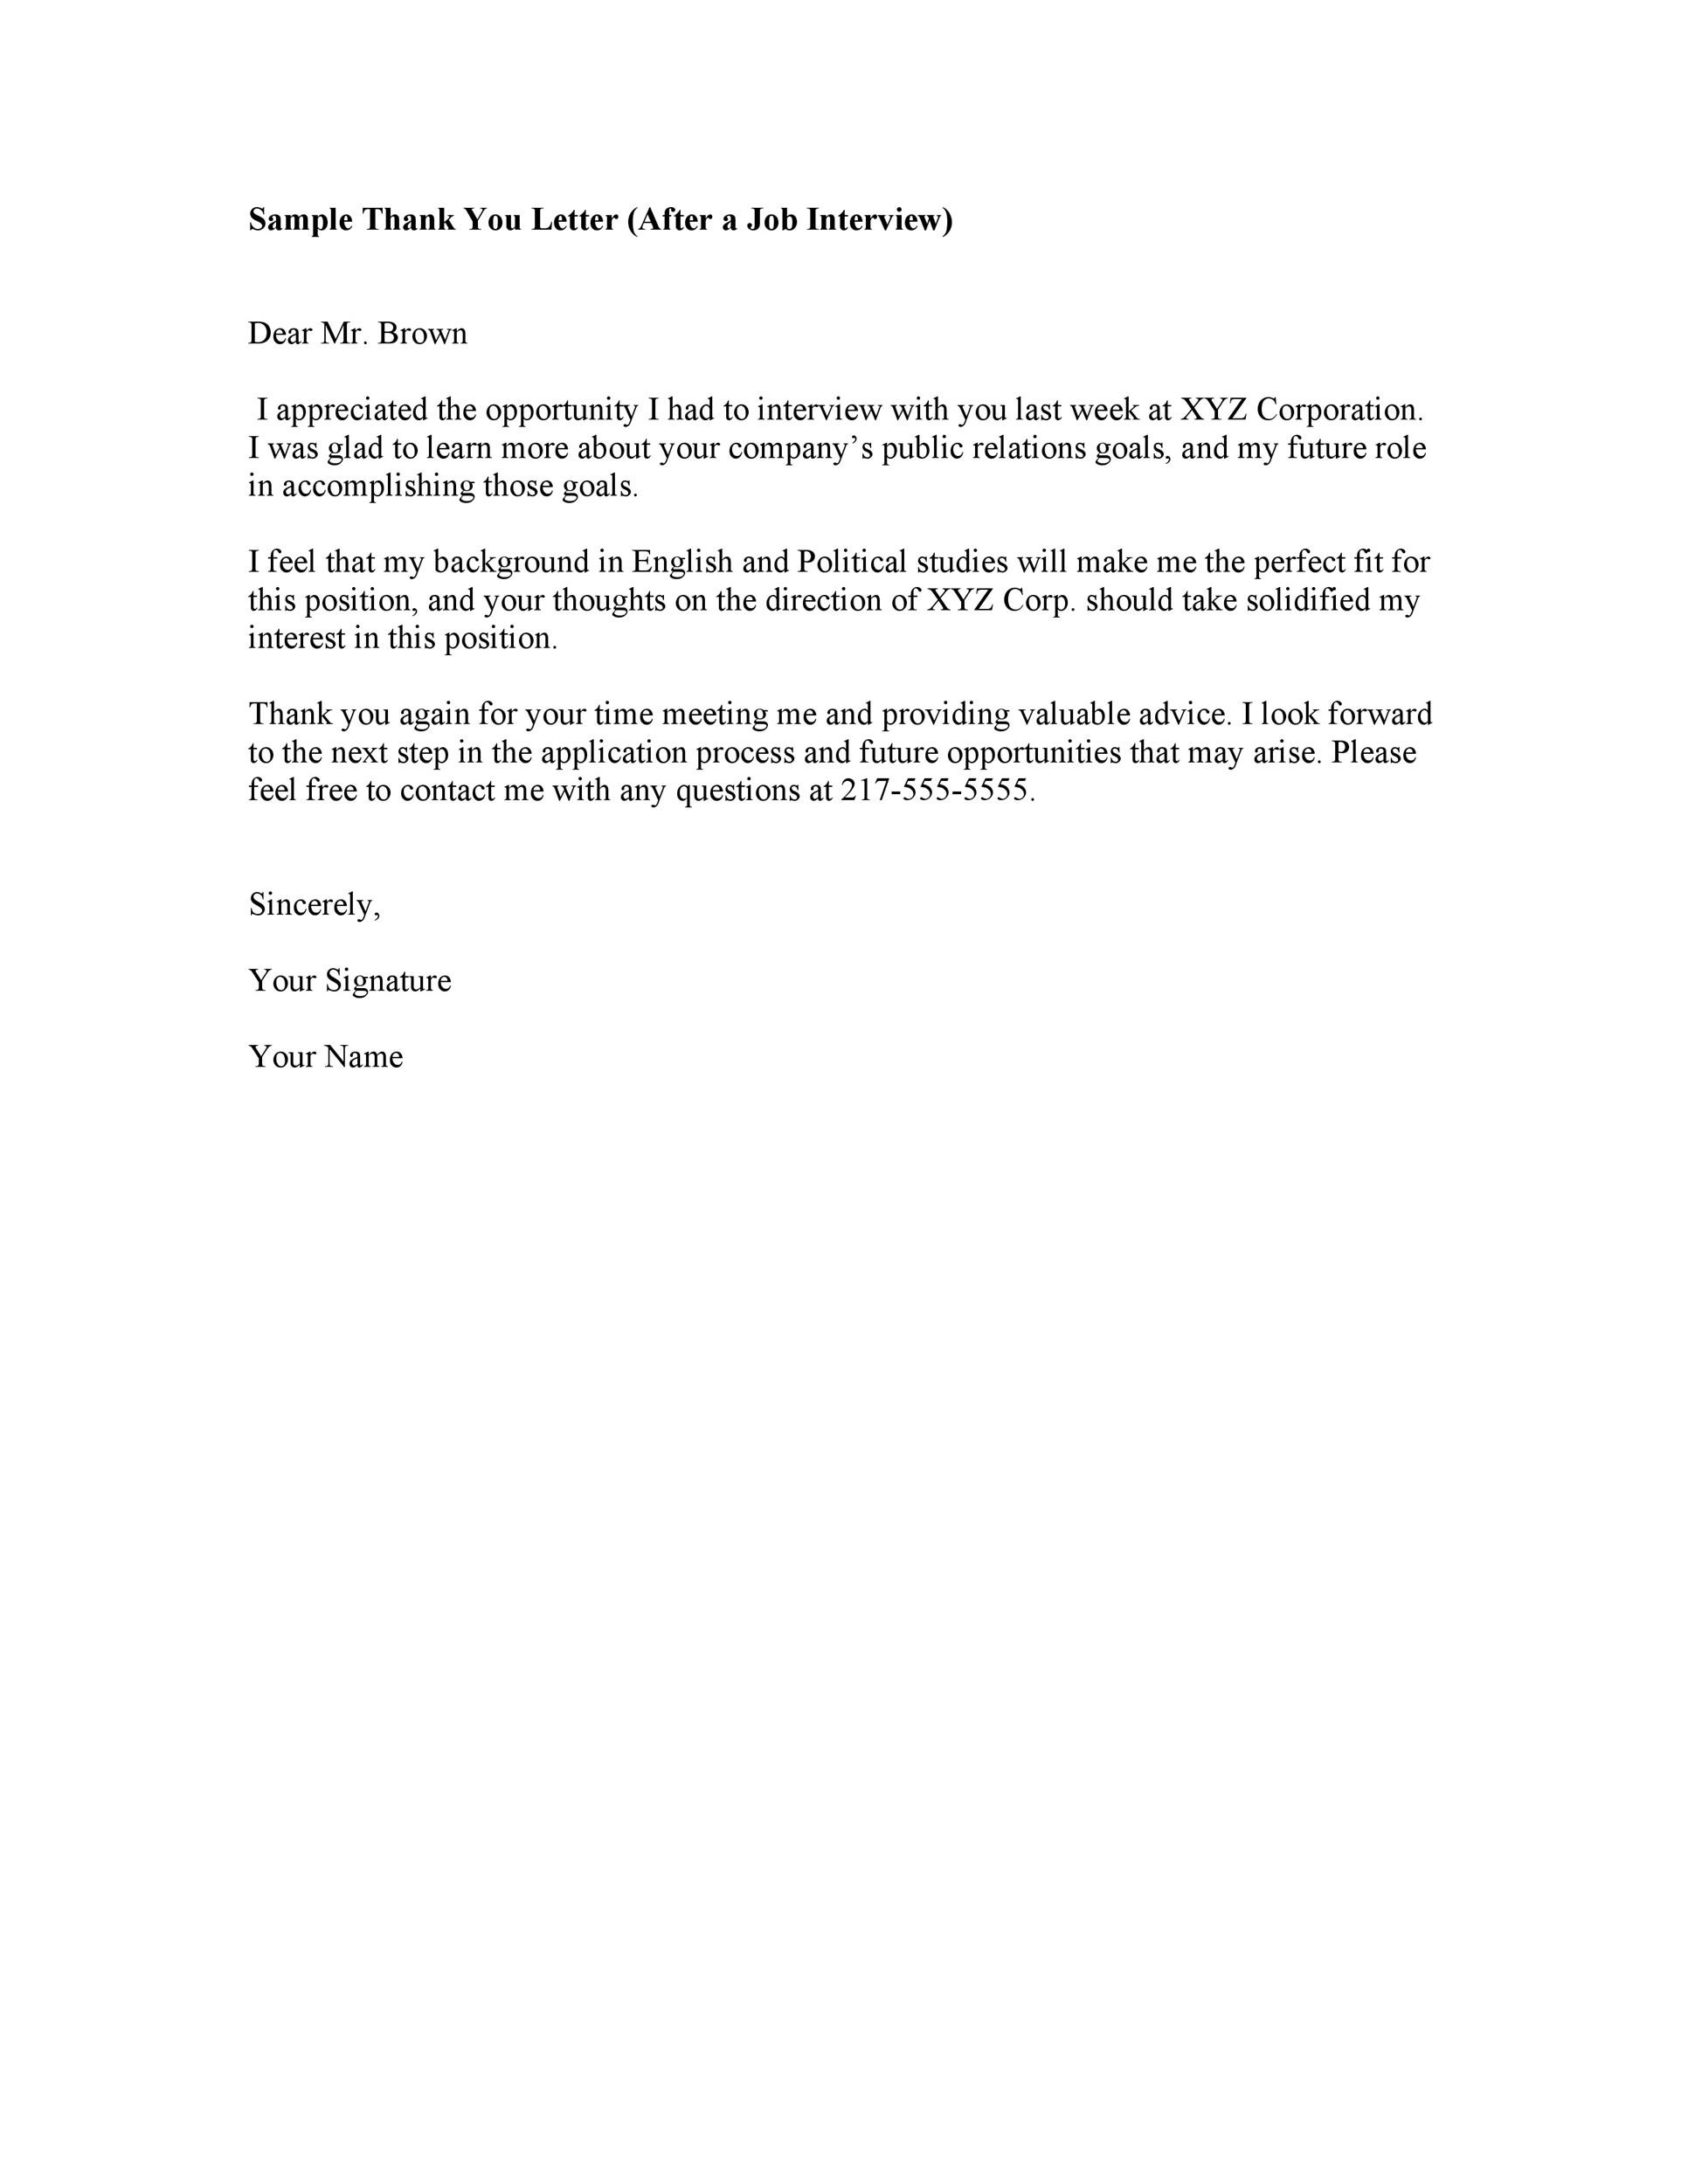 Thank You For Your Interest Letter from templatelab.com